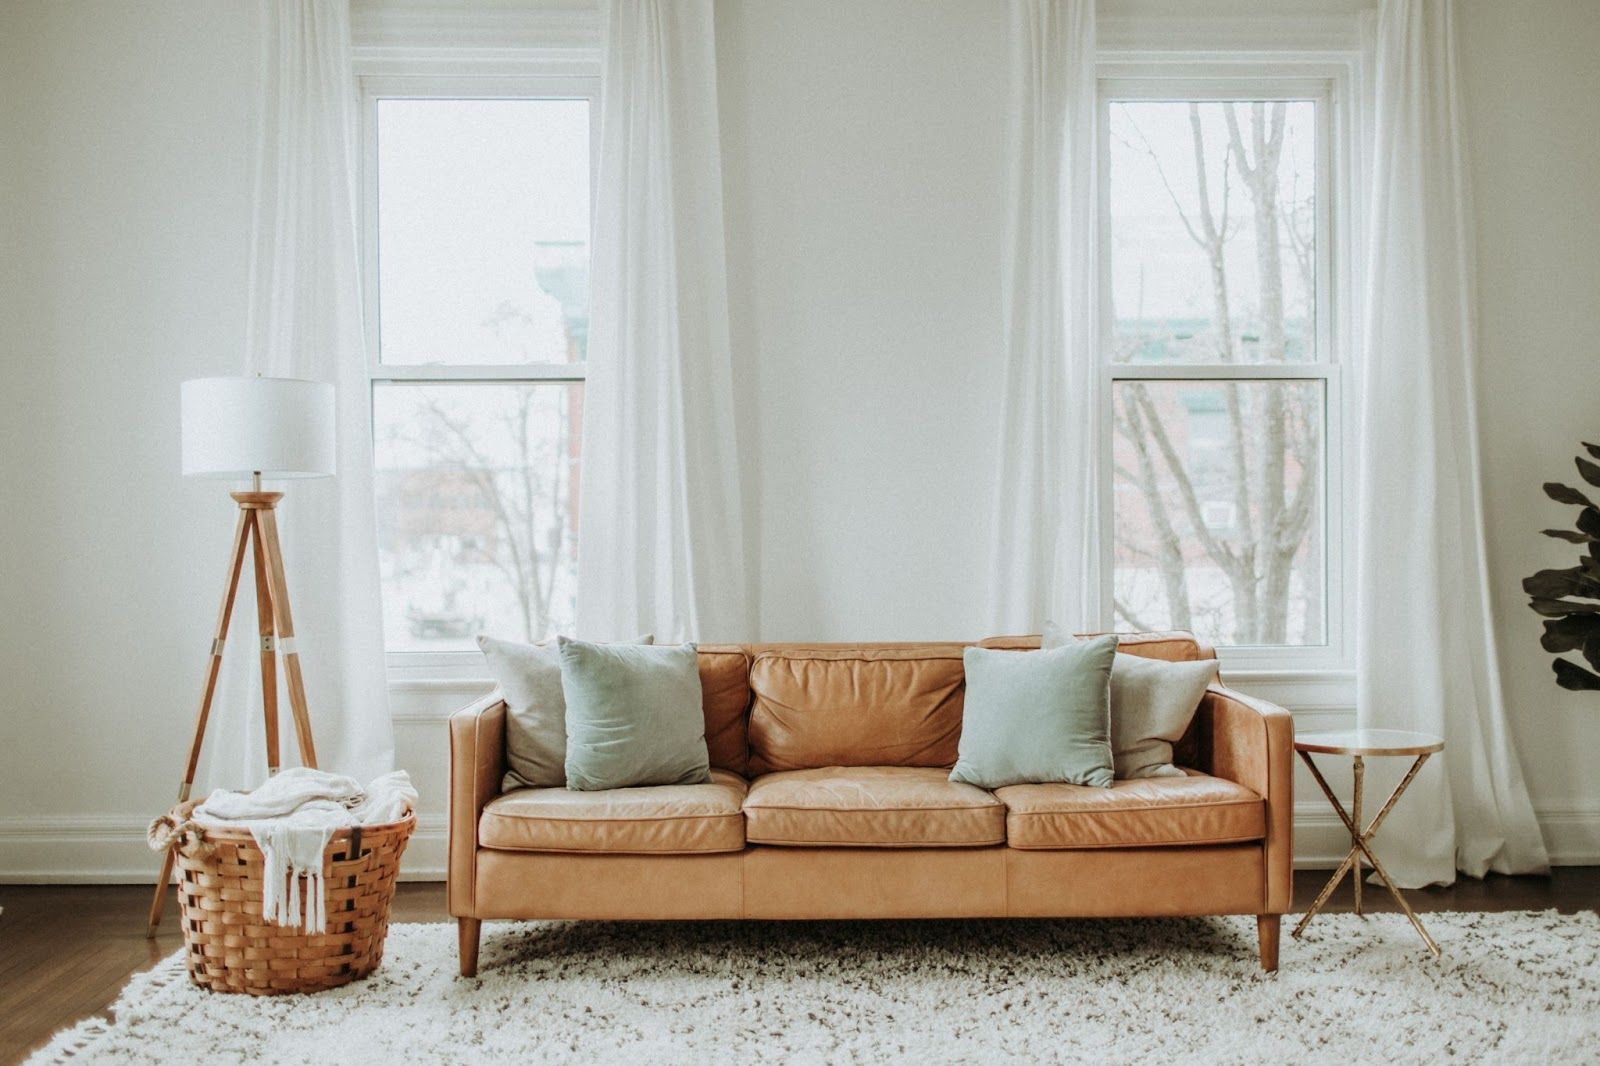 light brown leather couch in front of living room windows with a white textured rug underneath